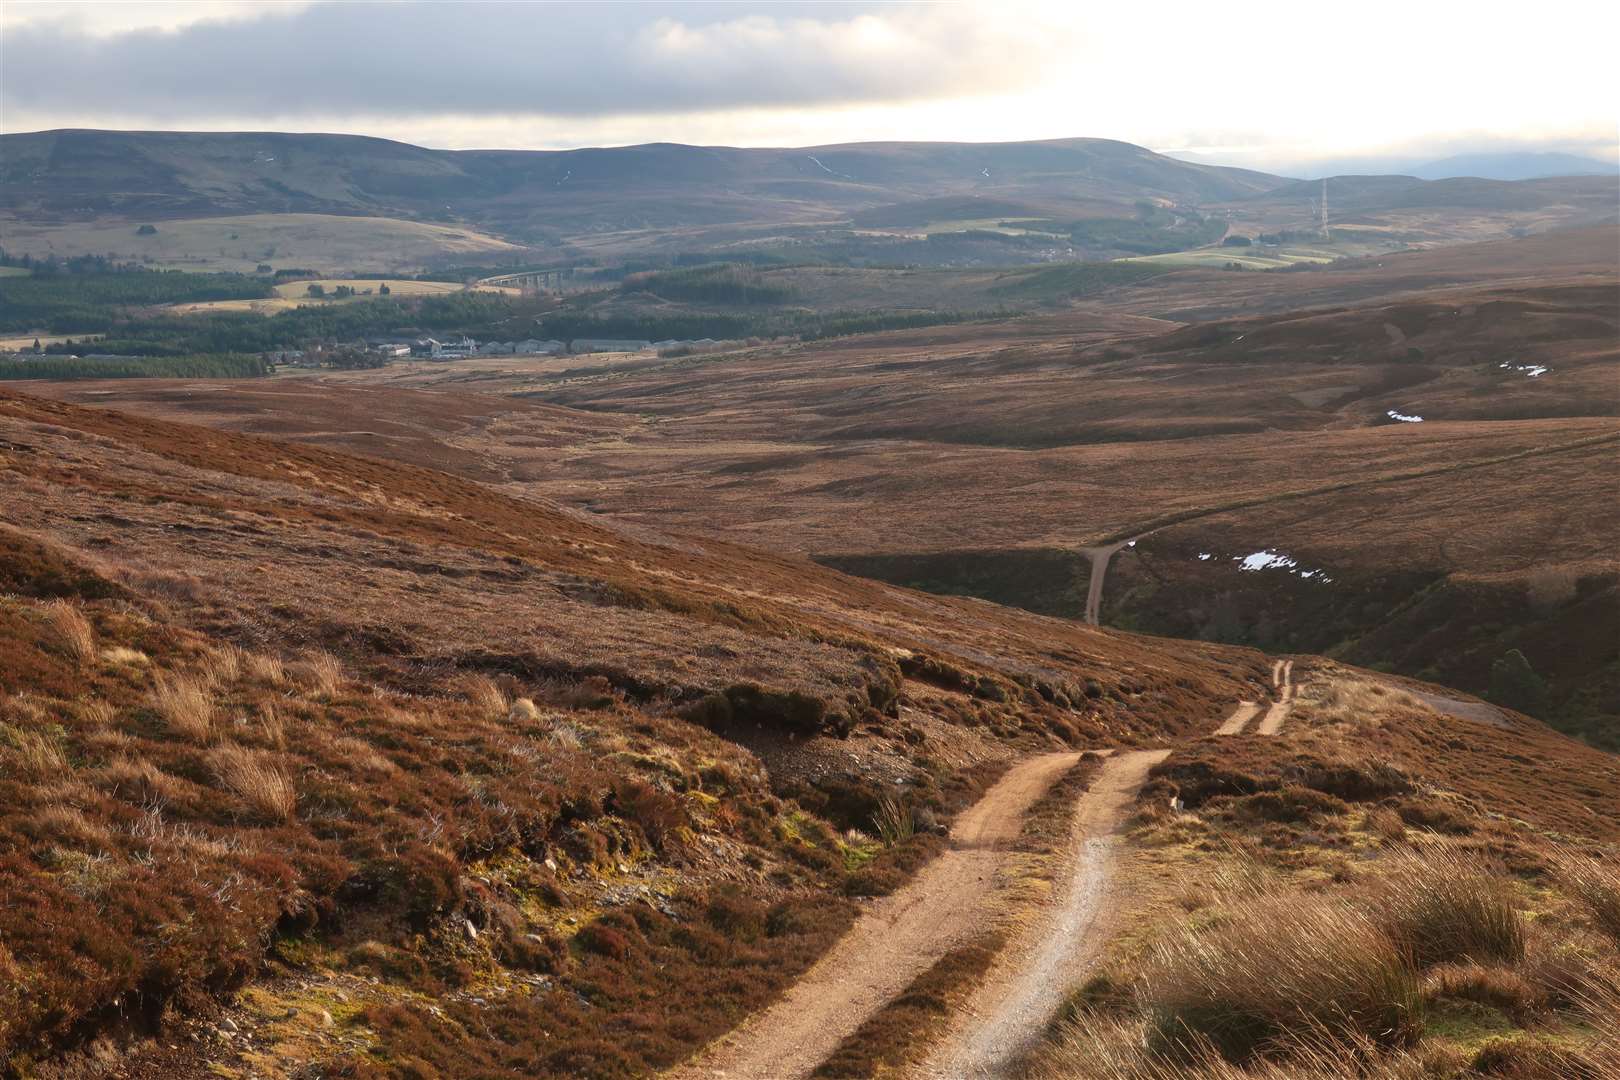 A steep descent from Carn Moraig gives a first view of Tomatin distillery down to the left.